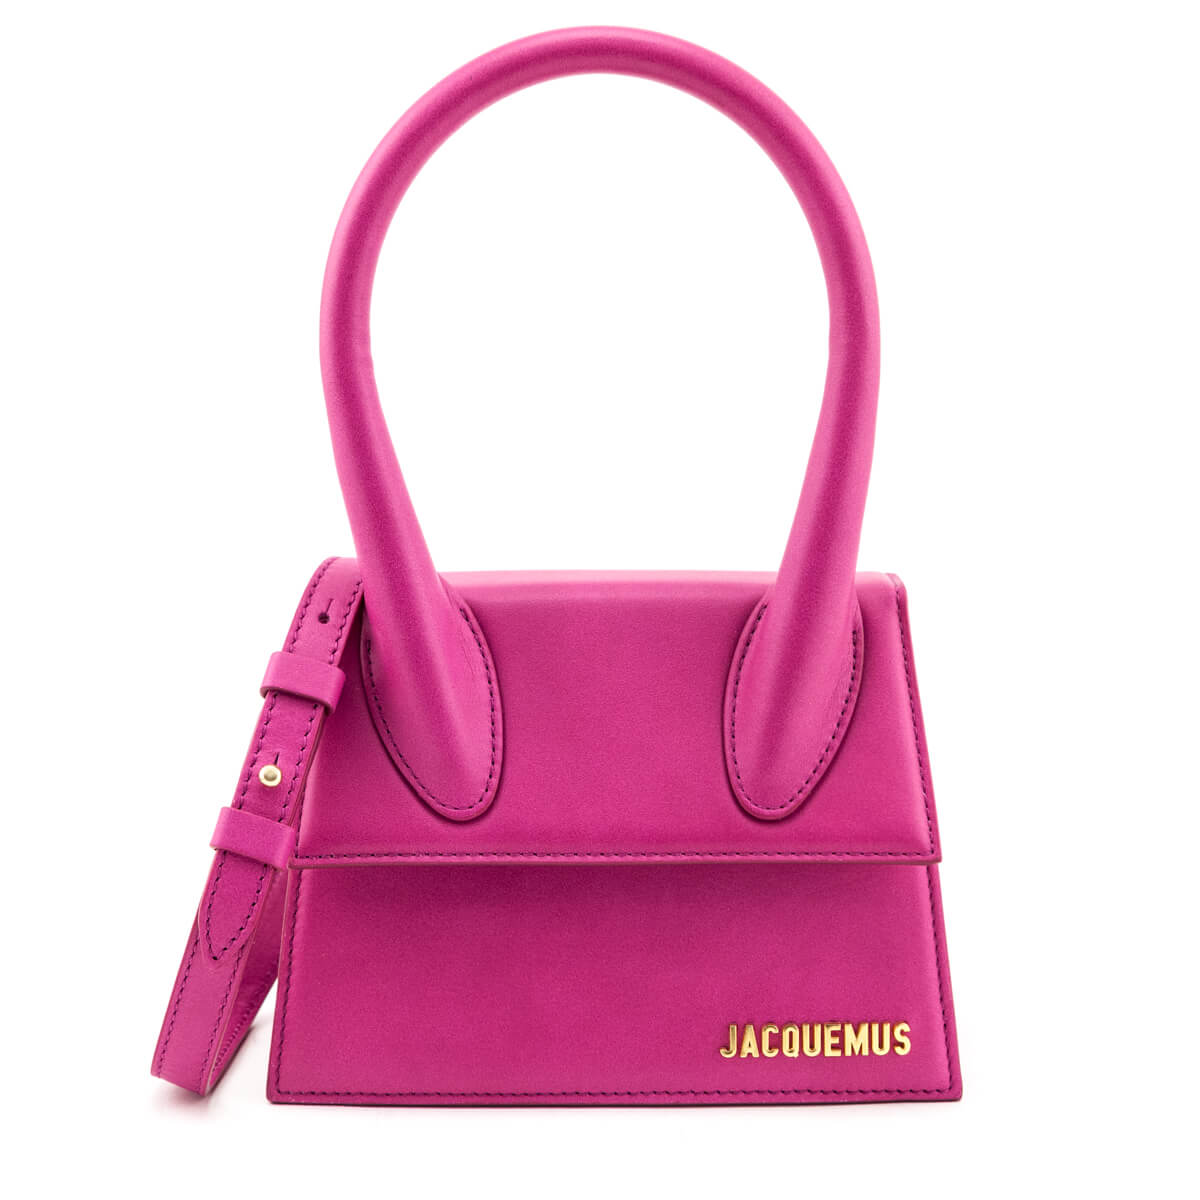 Jacquemus Pink Smooth Leather Medium Le Chiquito Bag - Love that Bag etc - Preowned Authentic Designer Handbags & Preloved Fashions